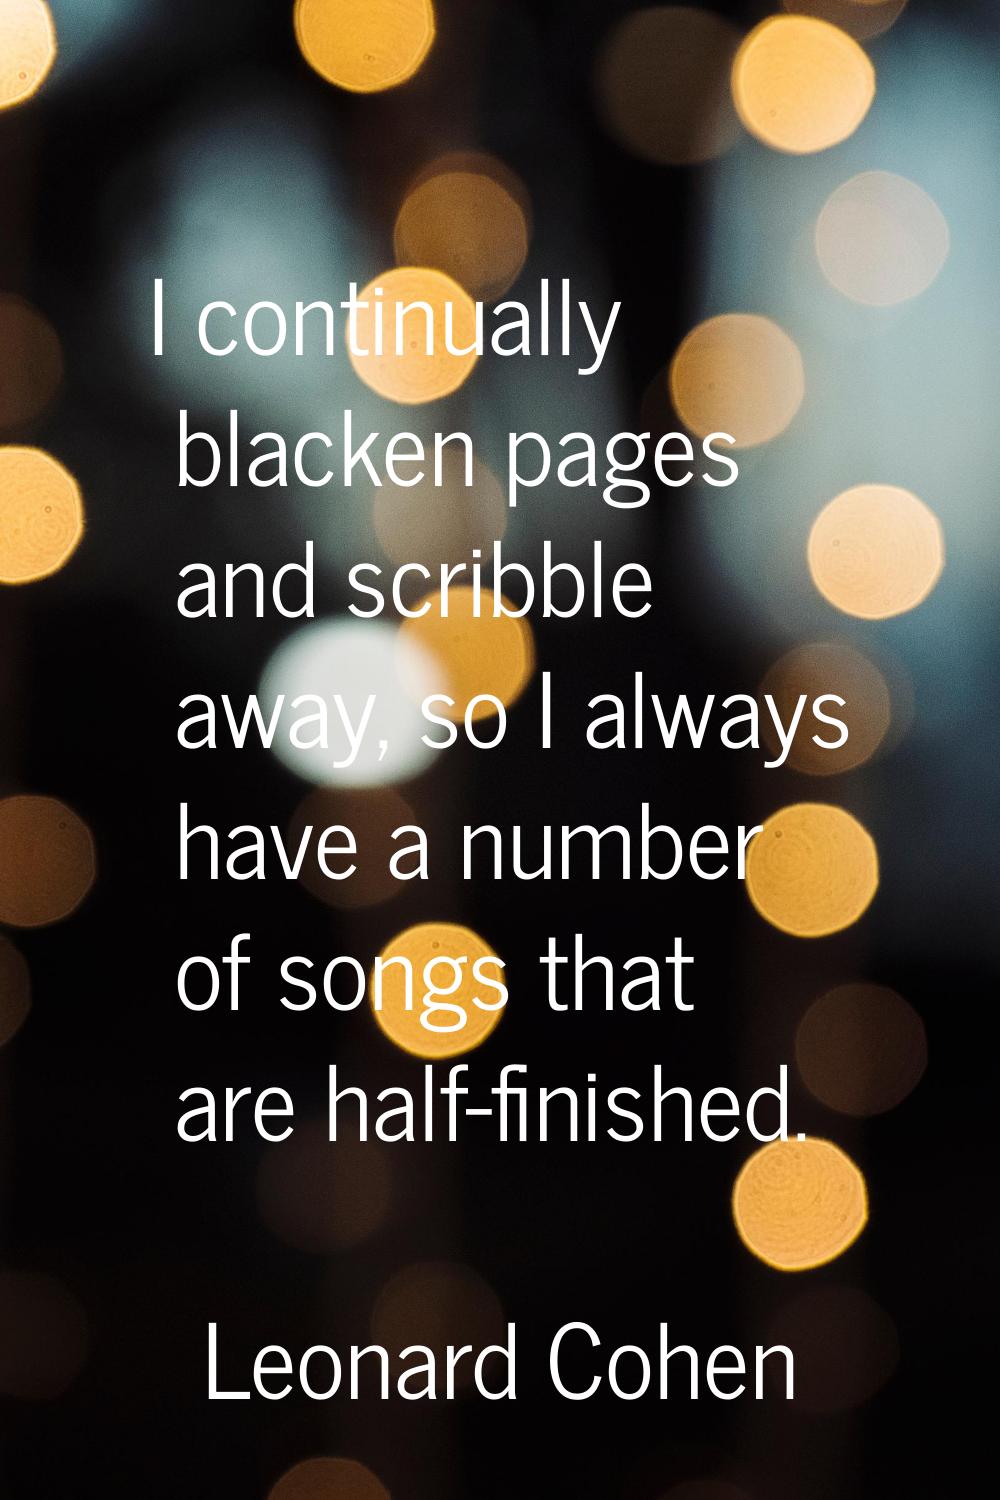 I continually blacken pages and scribble away, so I always have a number of songs that are half-fin